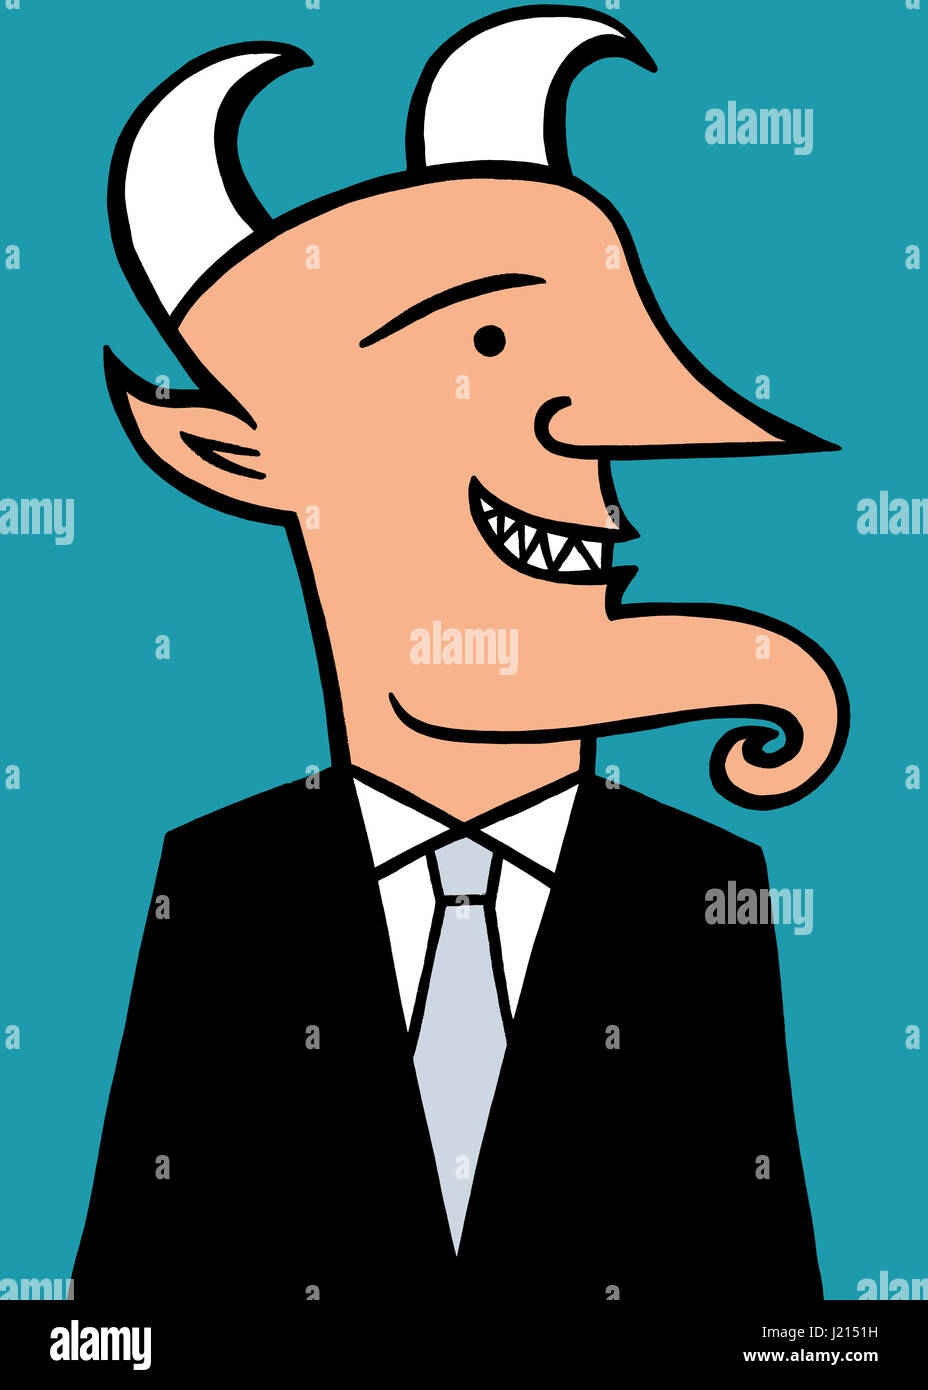 Business devil. A business illustration about thinking different thoughts. Stock Photo